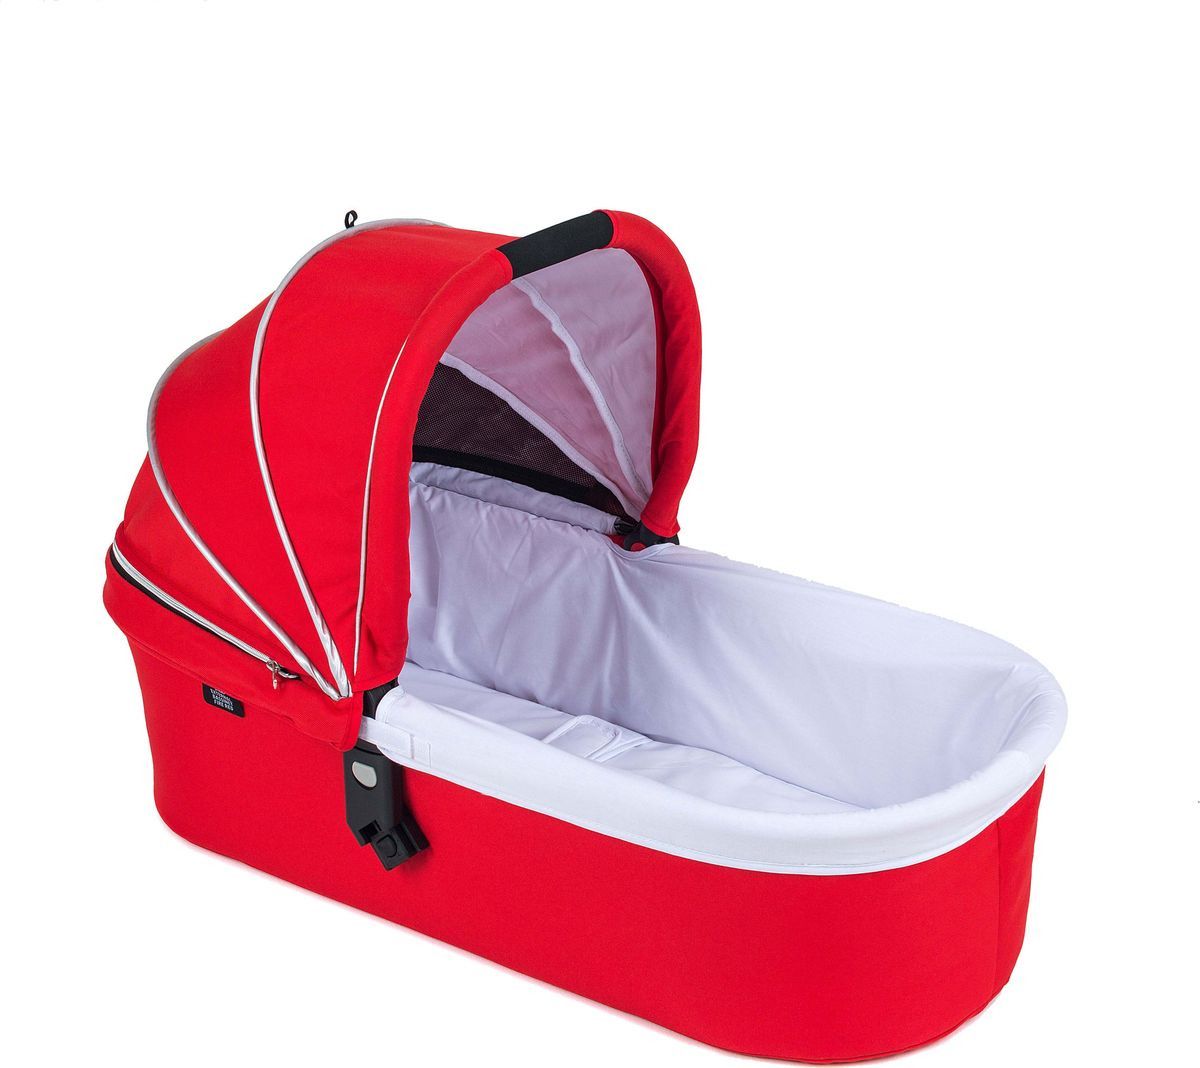  Valco Baby External Bassinet  Snap & Snap4 Fire Red